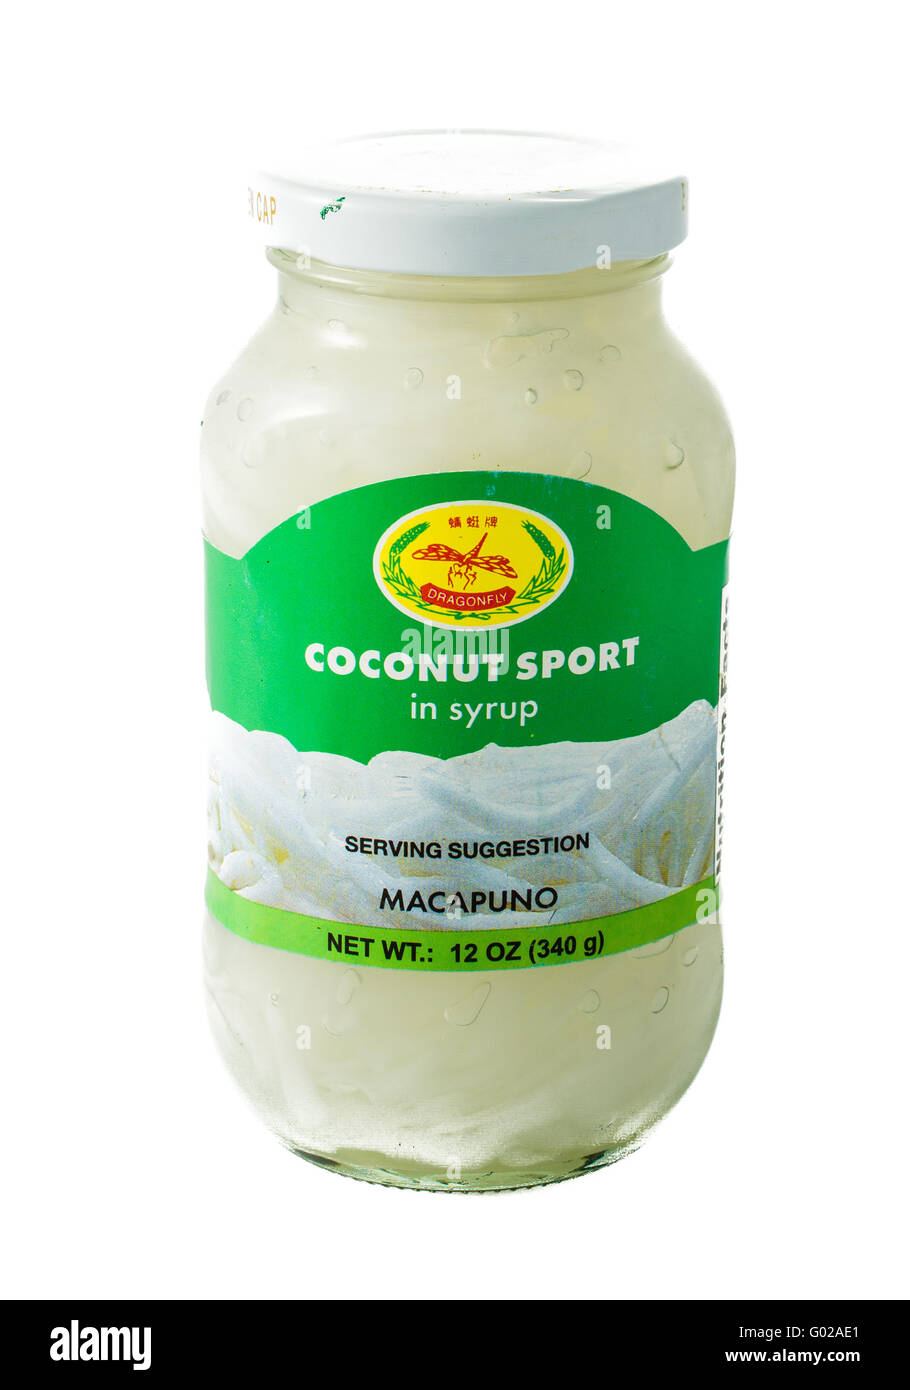 Winneconne, WI - 5 February 2015: Jar of Coconut Sport served in syrup imported by Dragonfly. Stock Photo